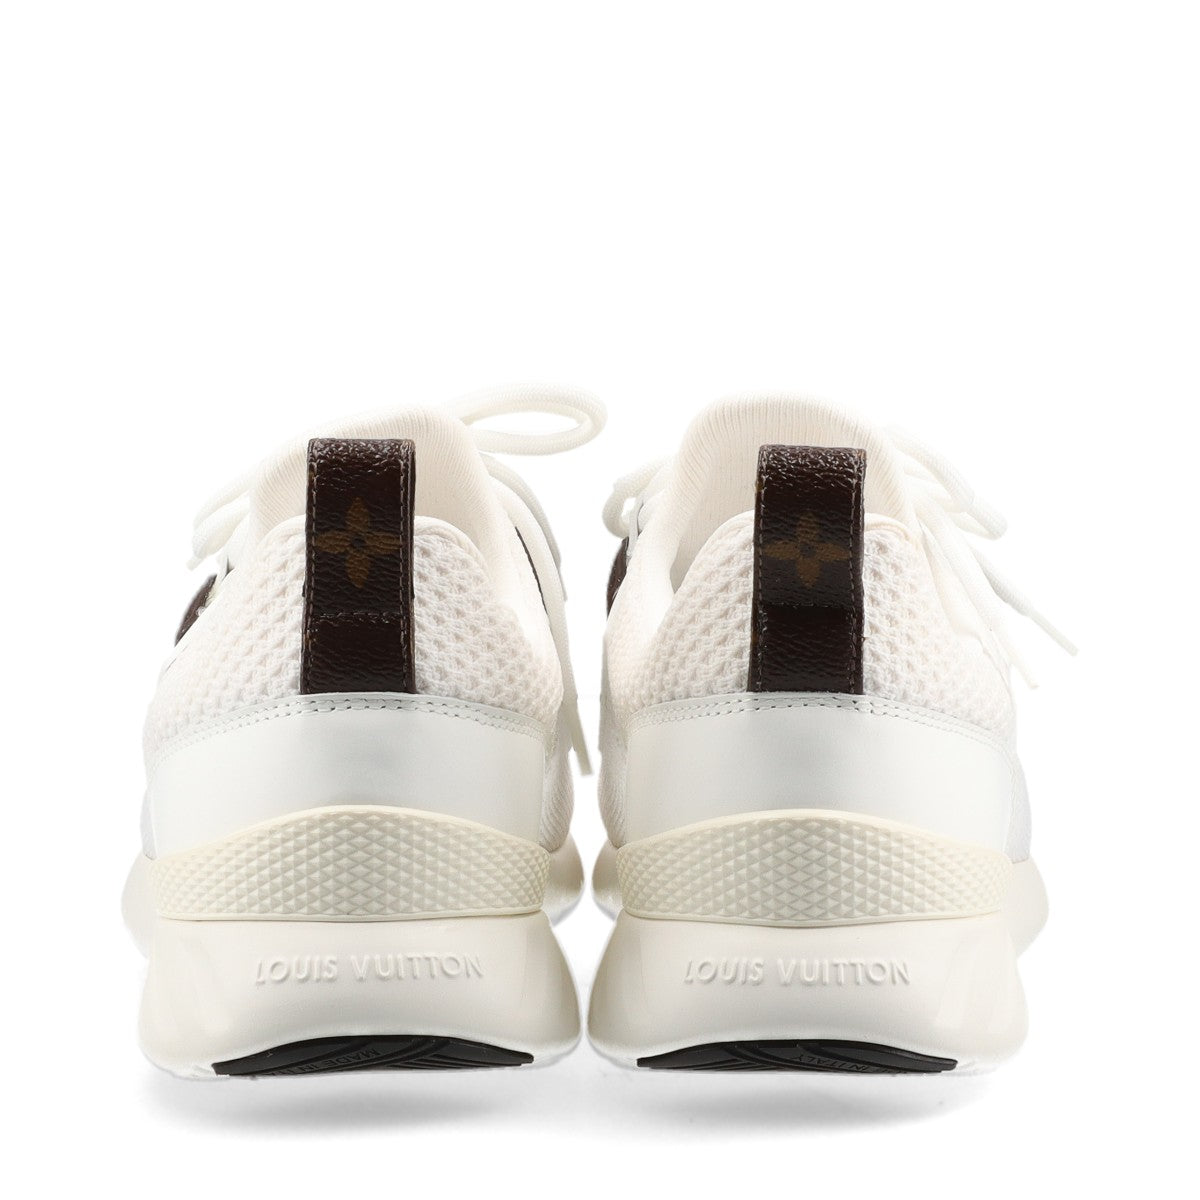 Louis Vuitton After game line Knit × Leather Sneakers EU38 1/2 Ladies' White x brown Monogram Discolored There is a replacement string